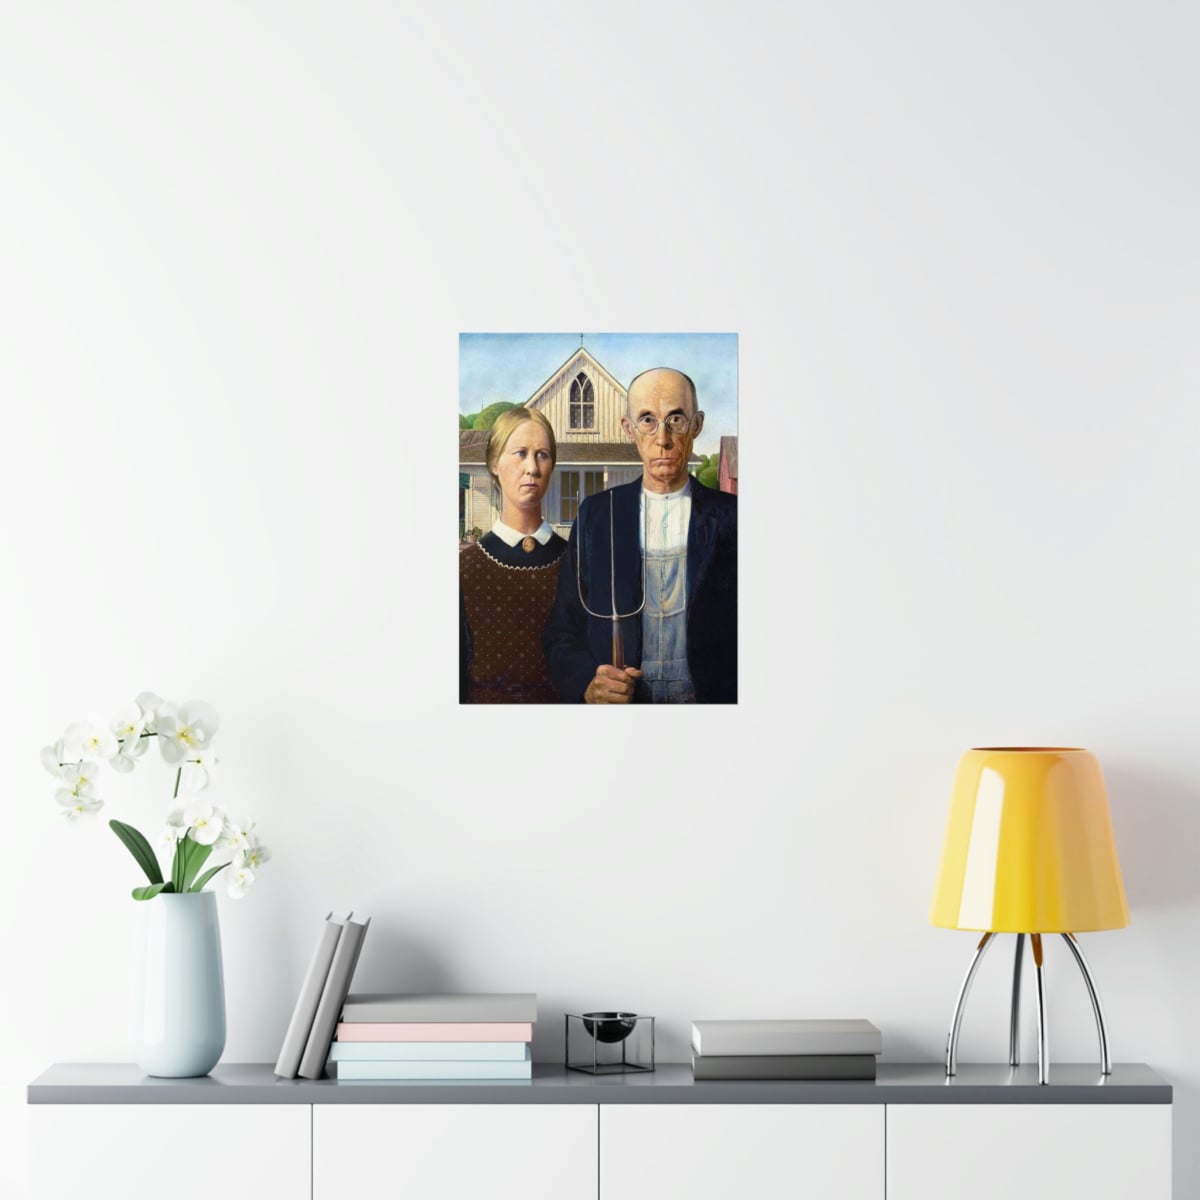 American Gothic by Grant Wood Art Premium Posters